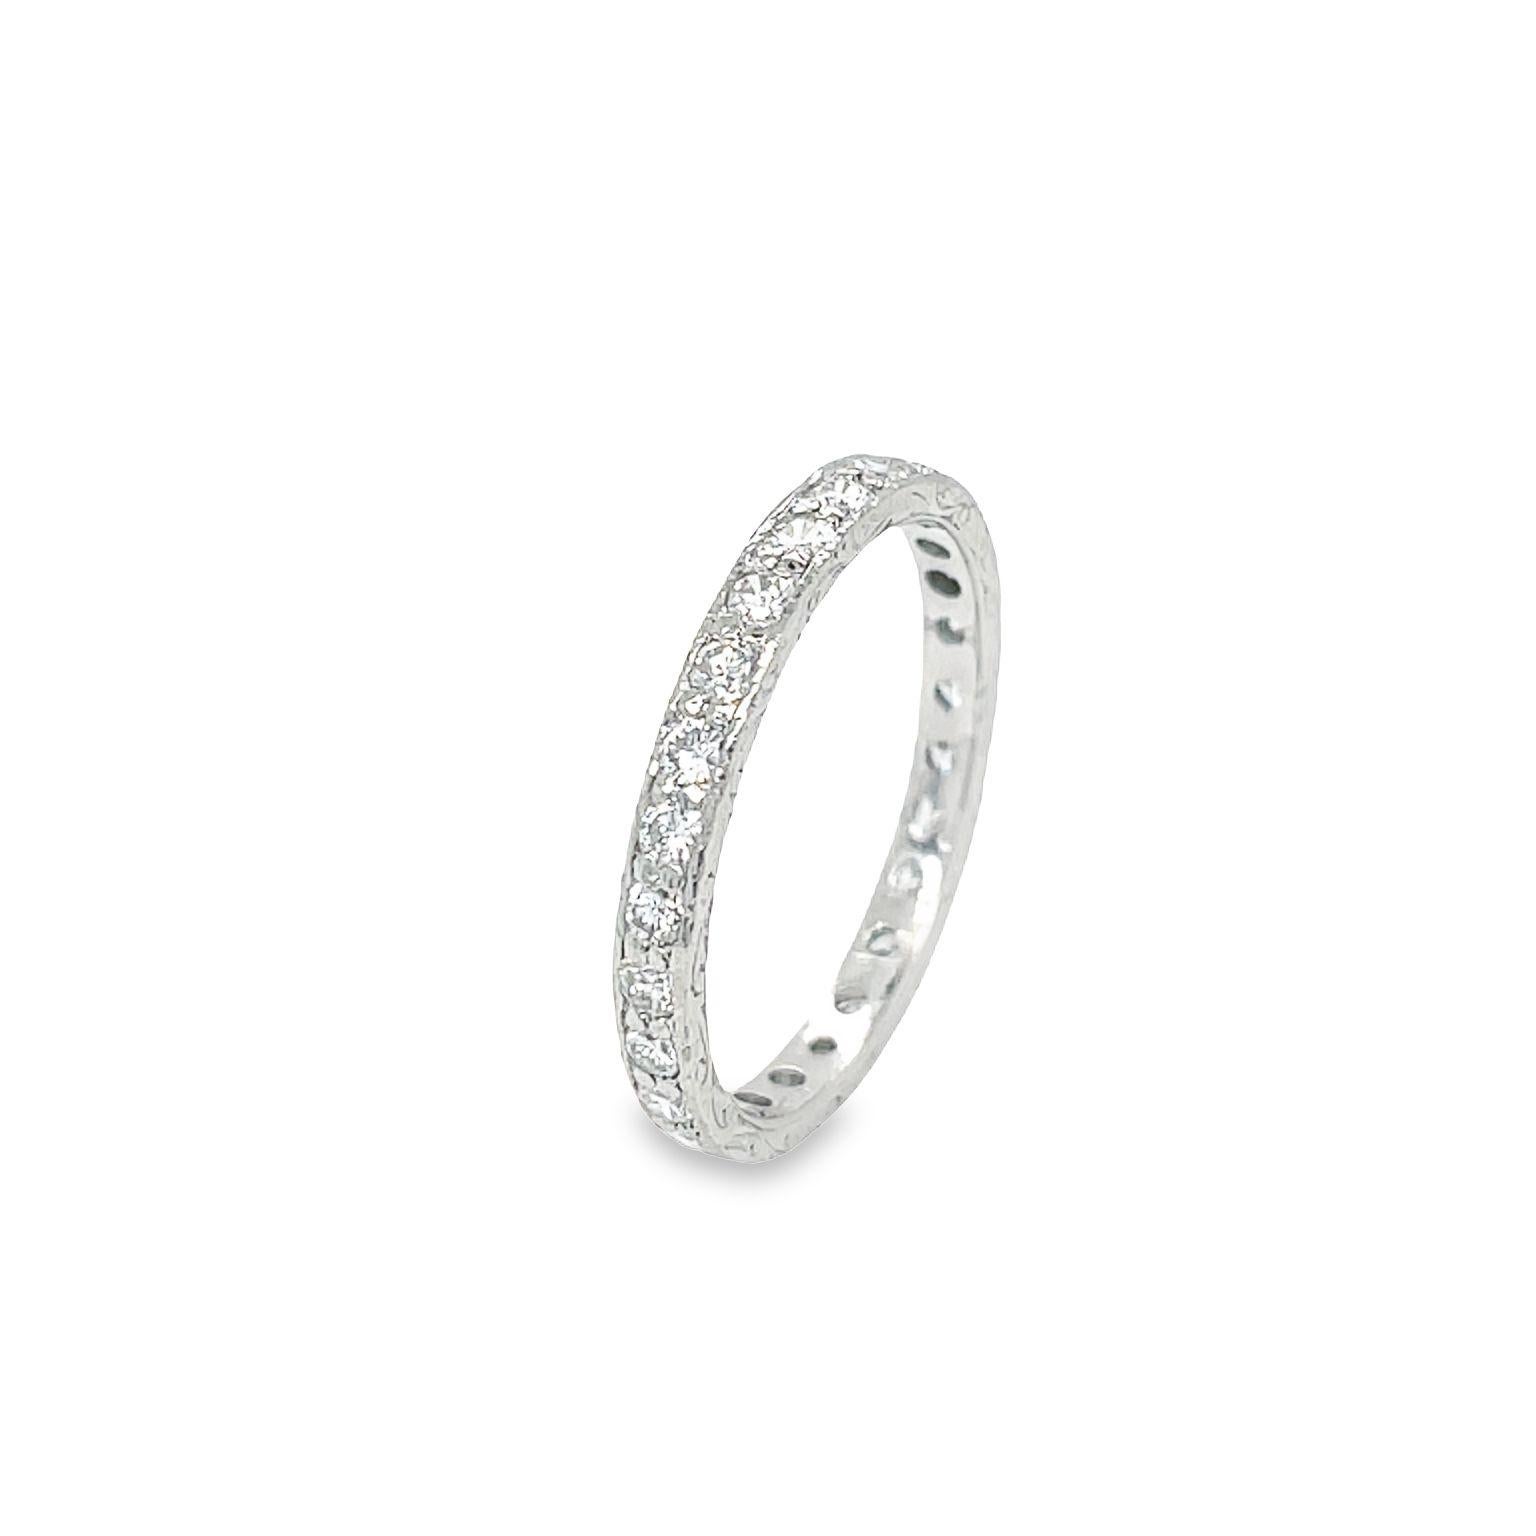 Vintage Diamond Eternity Ring in Platinum In Good Condition For Sale In beverly hills, CA